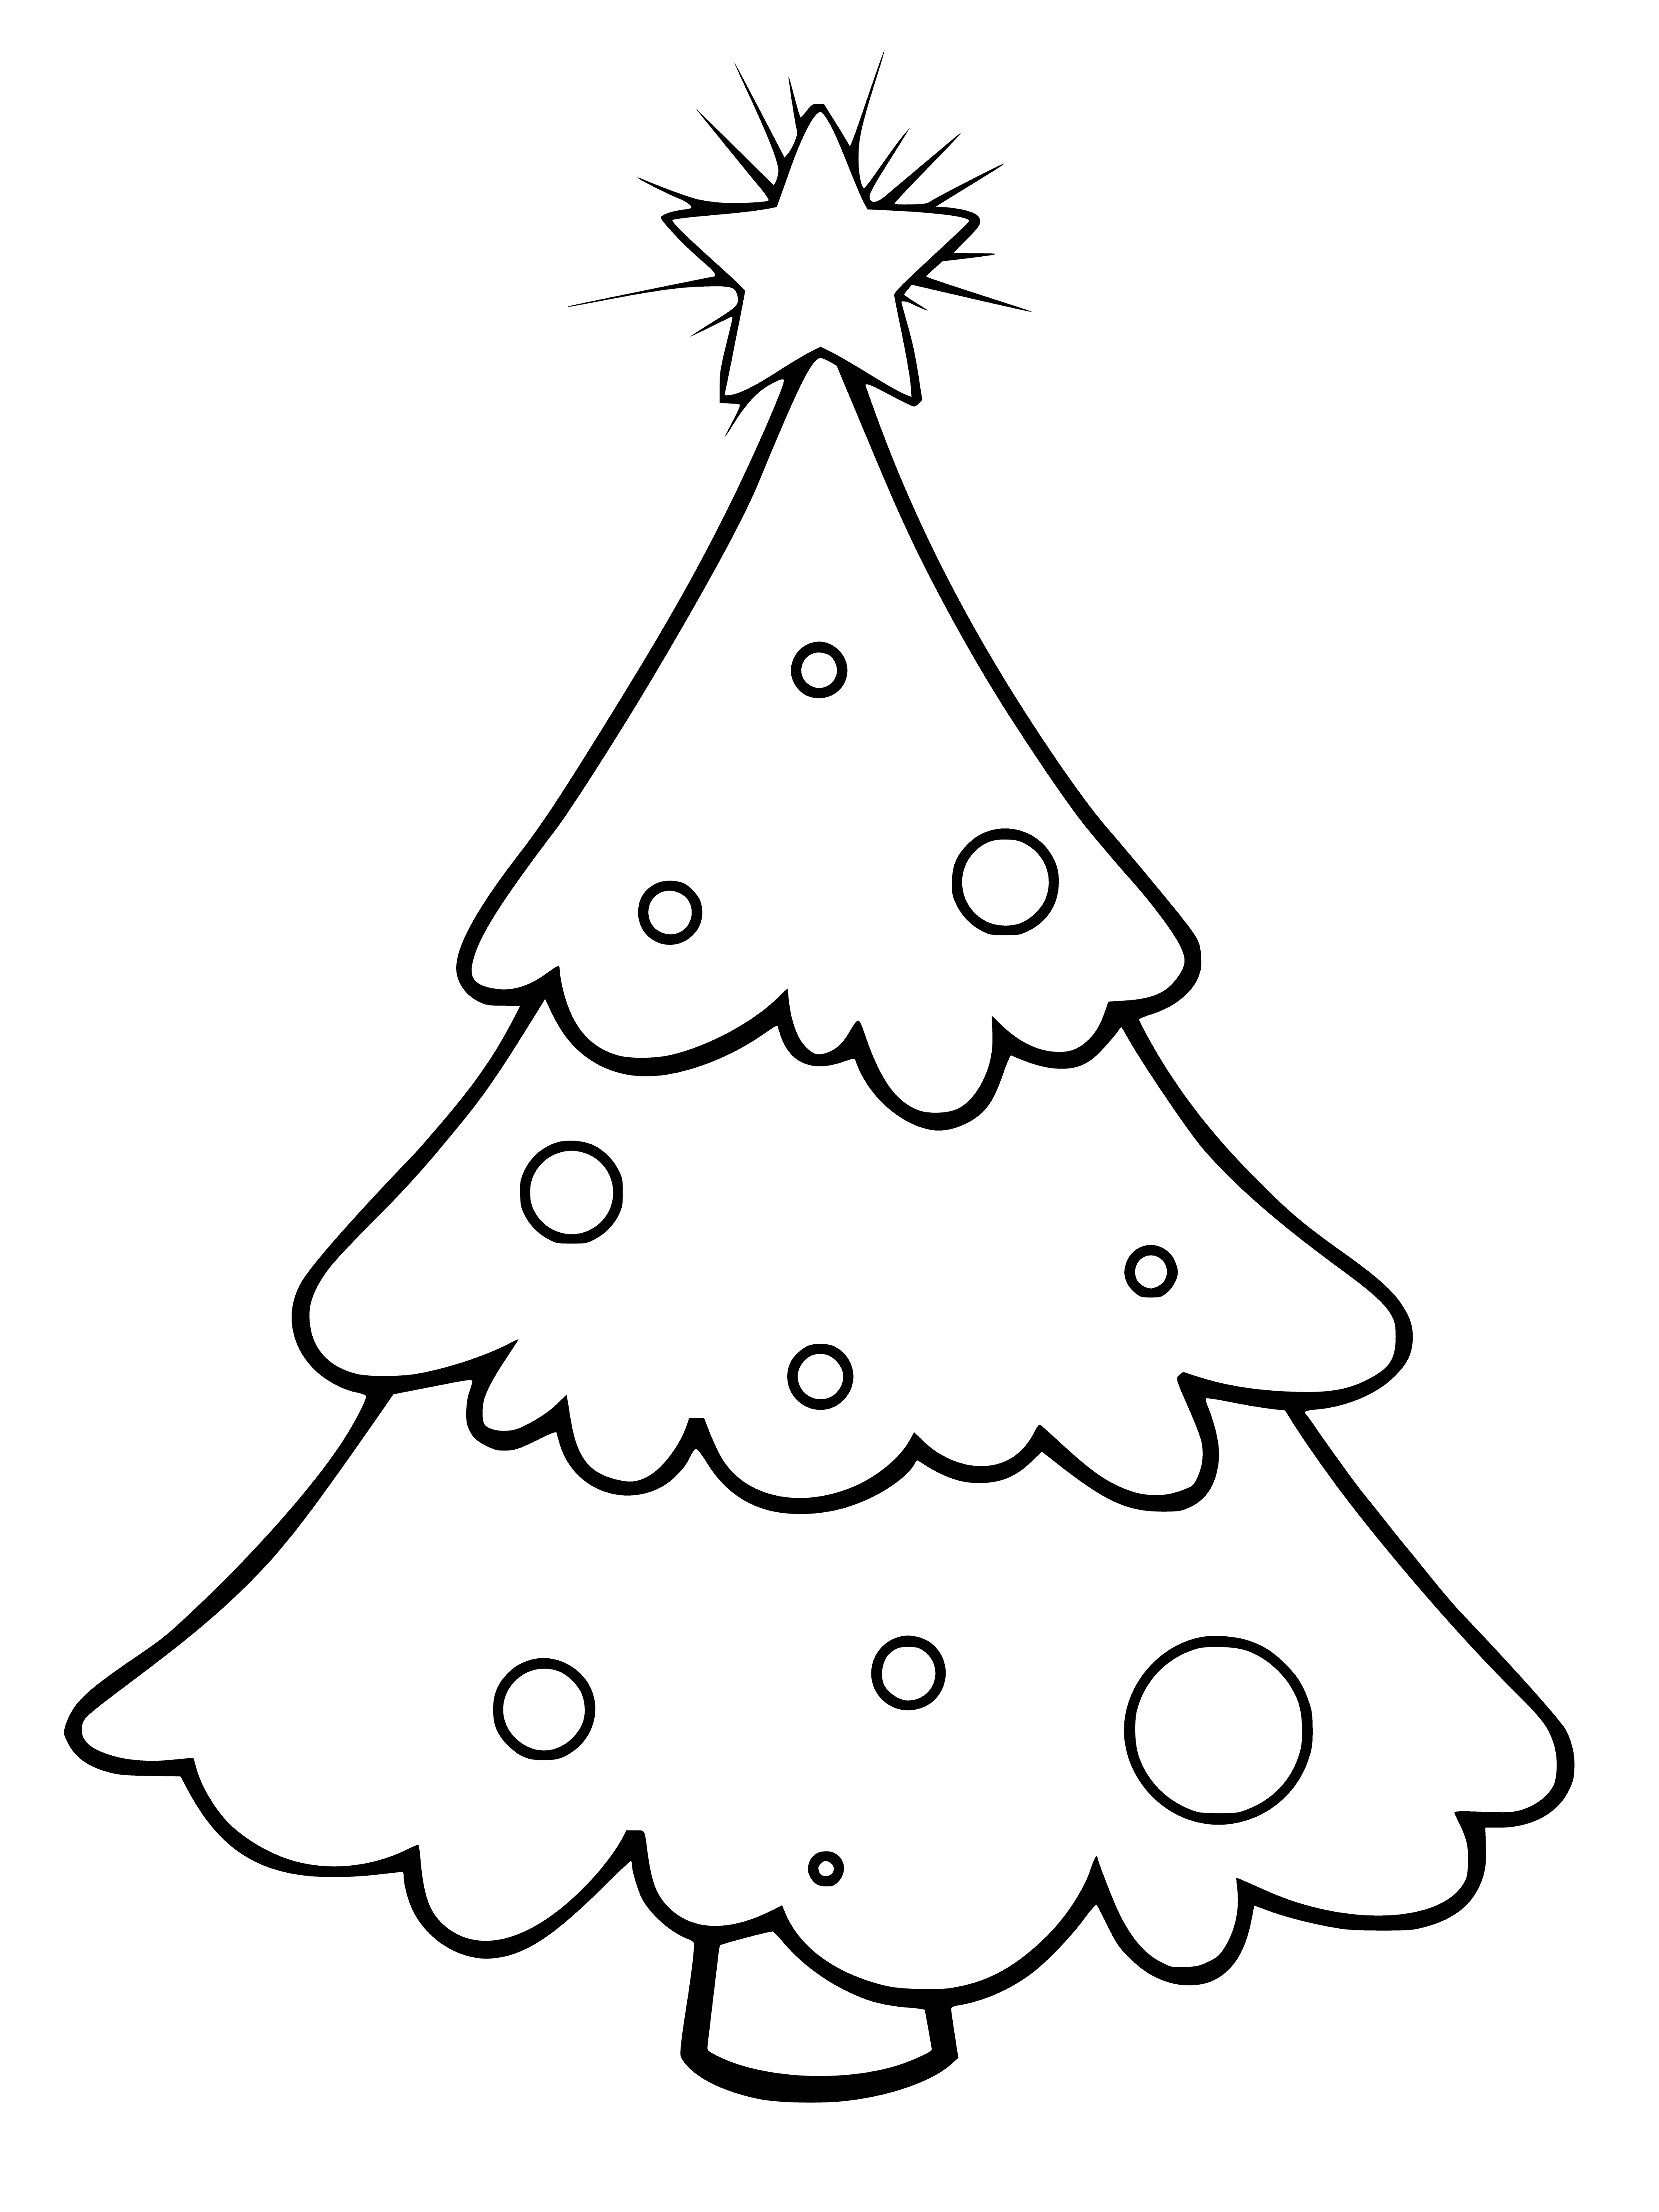 coloring page: Tall, elegant Christmas tree w/ lights, garlands, & ornaments standing magnificently in middle of room.